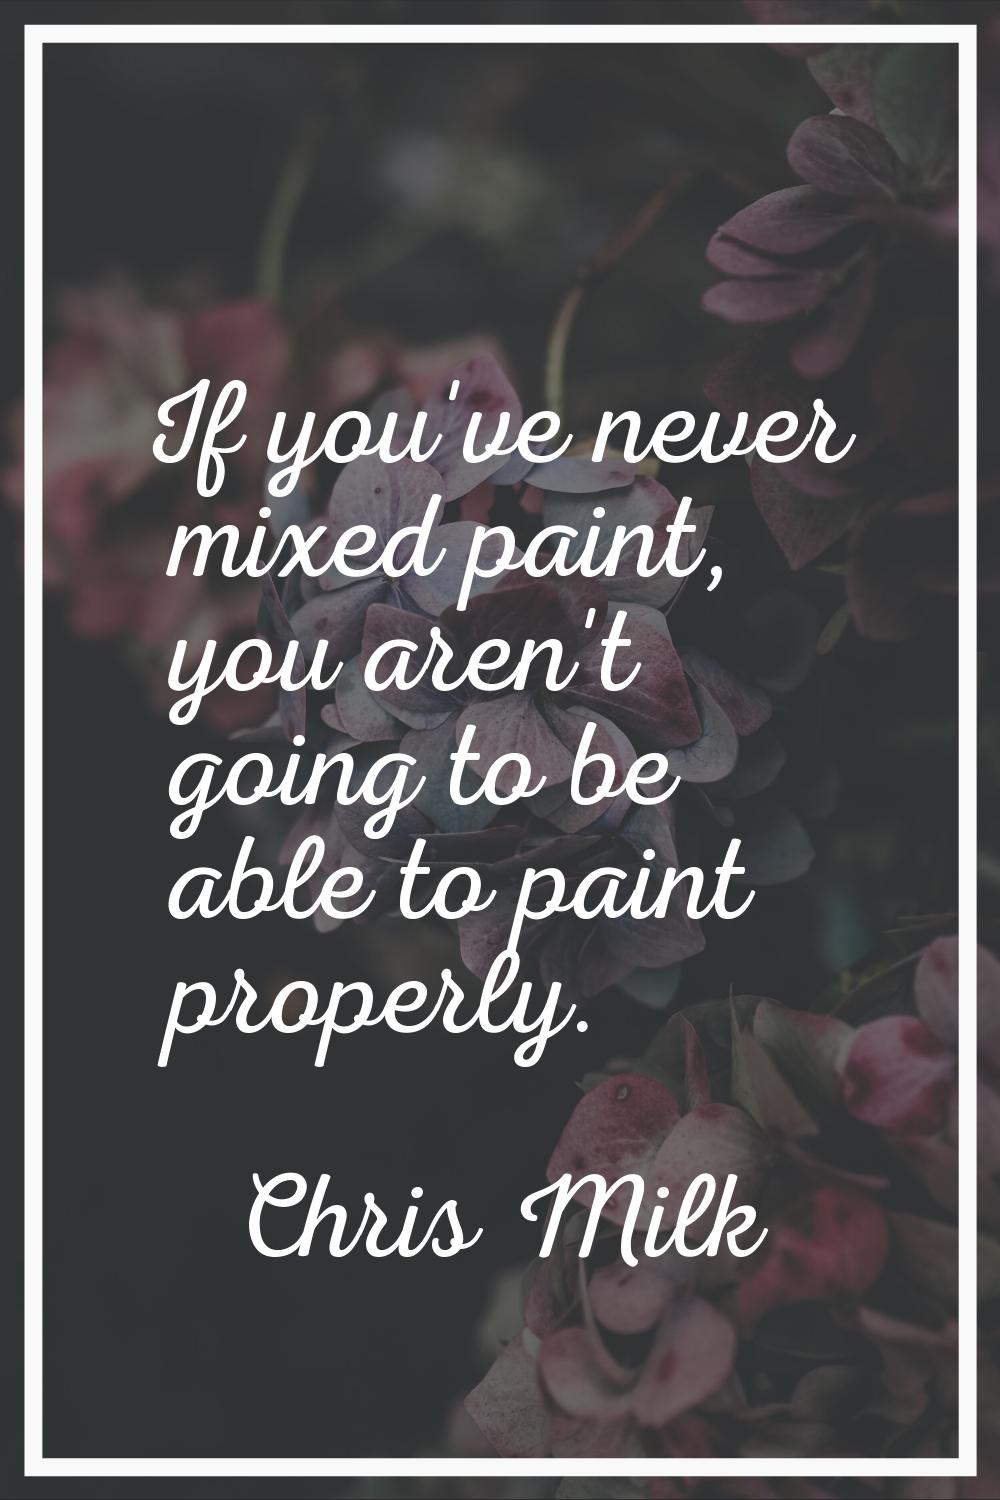 If you've never mixed paint, you aren't going to be able to paint properly.